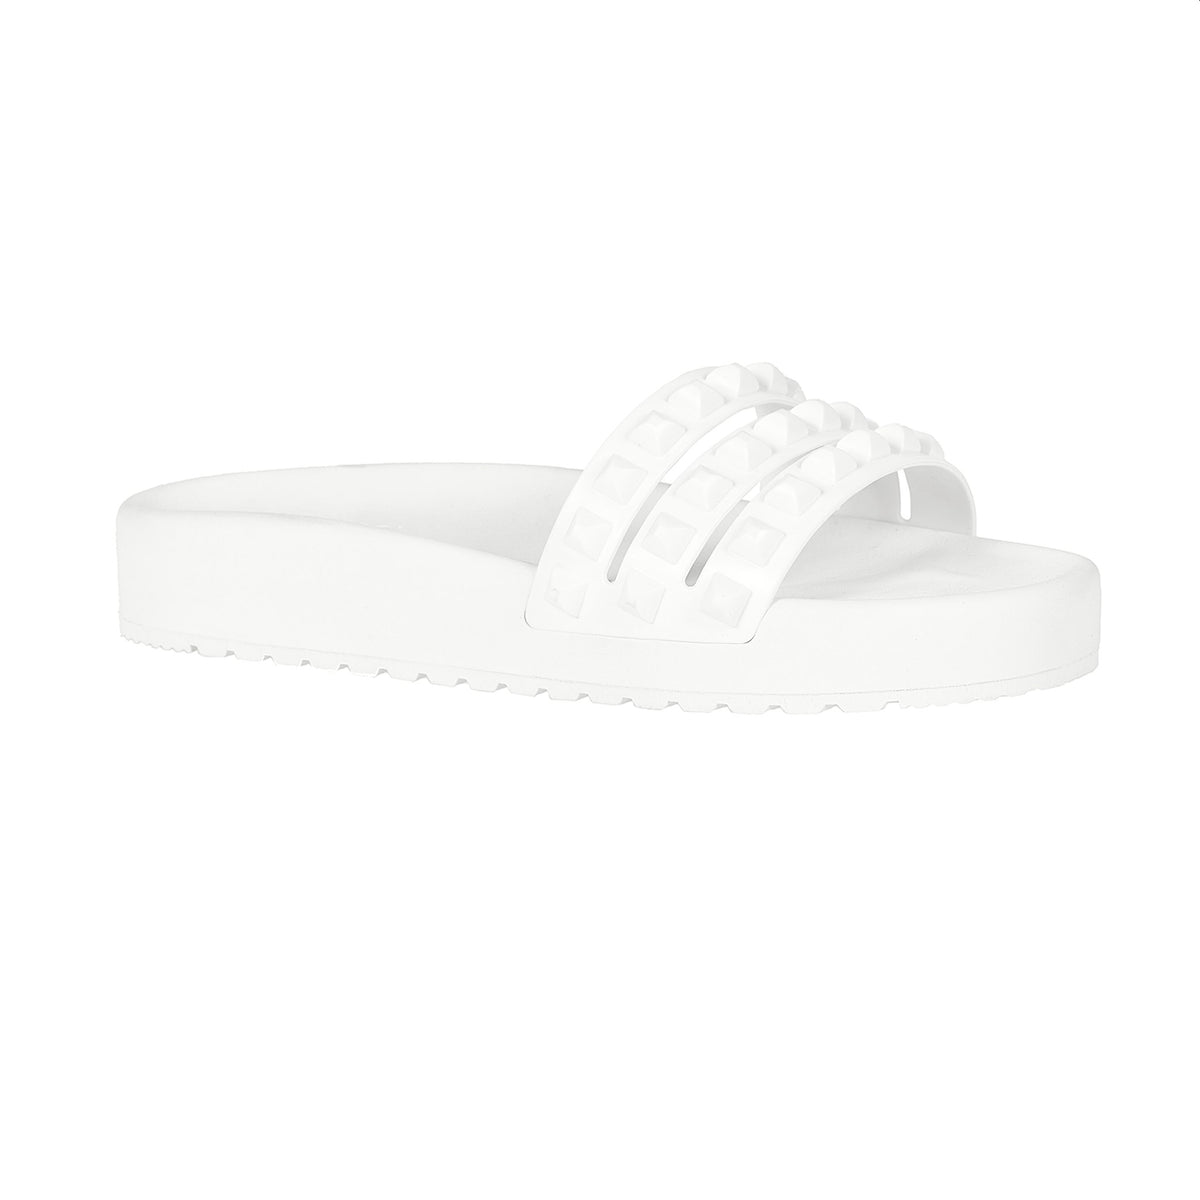 Jelly white sandals ultra shinny look, party look summer sandals for women from carmen sol